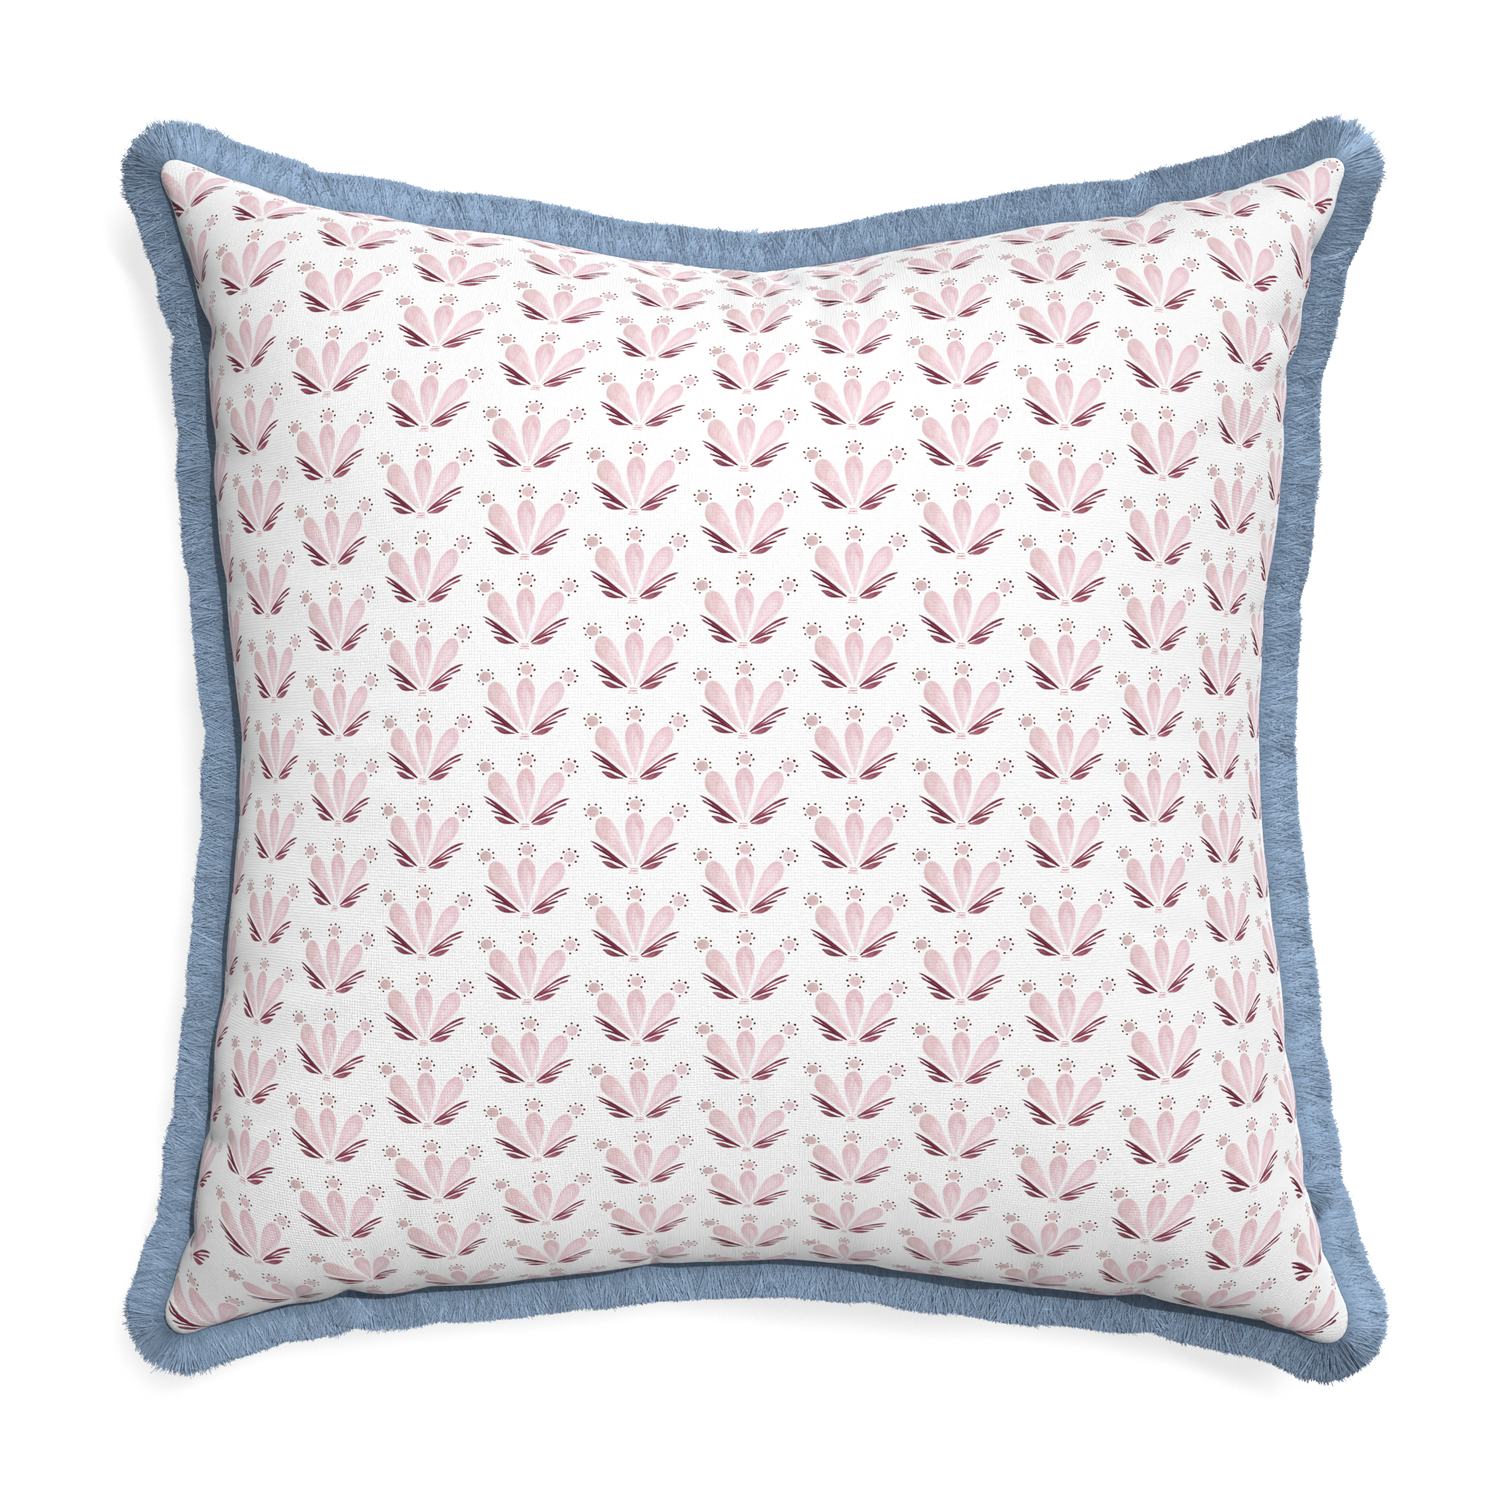 Euro-sham serena pink custom pink & burgundy drop repeat floralpillow with sky fringe on white background